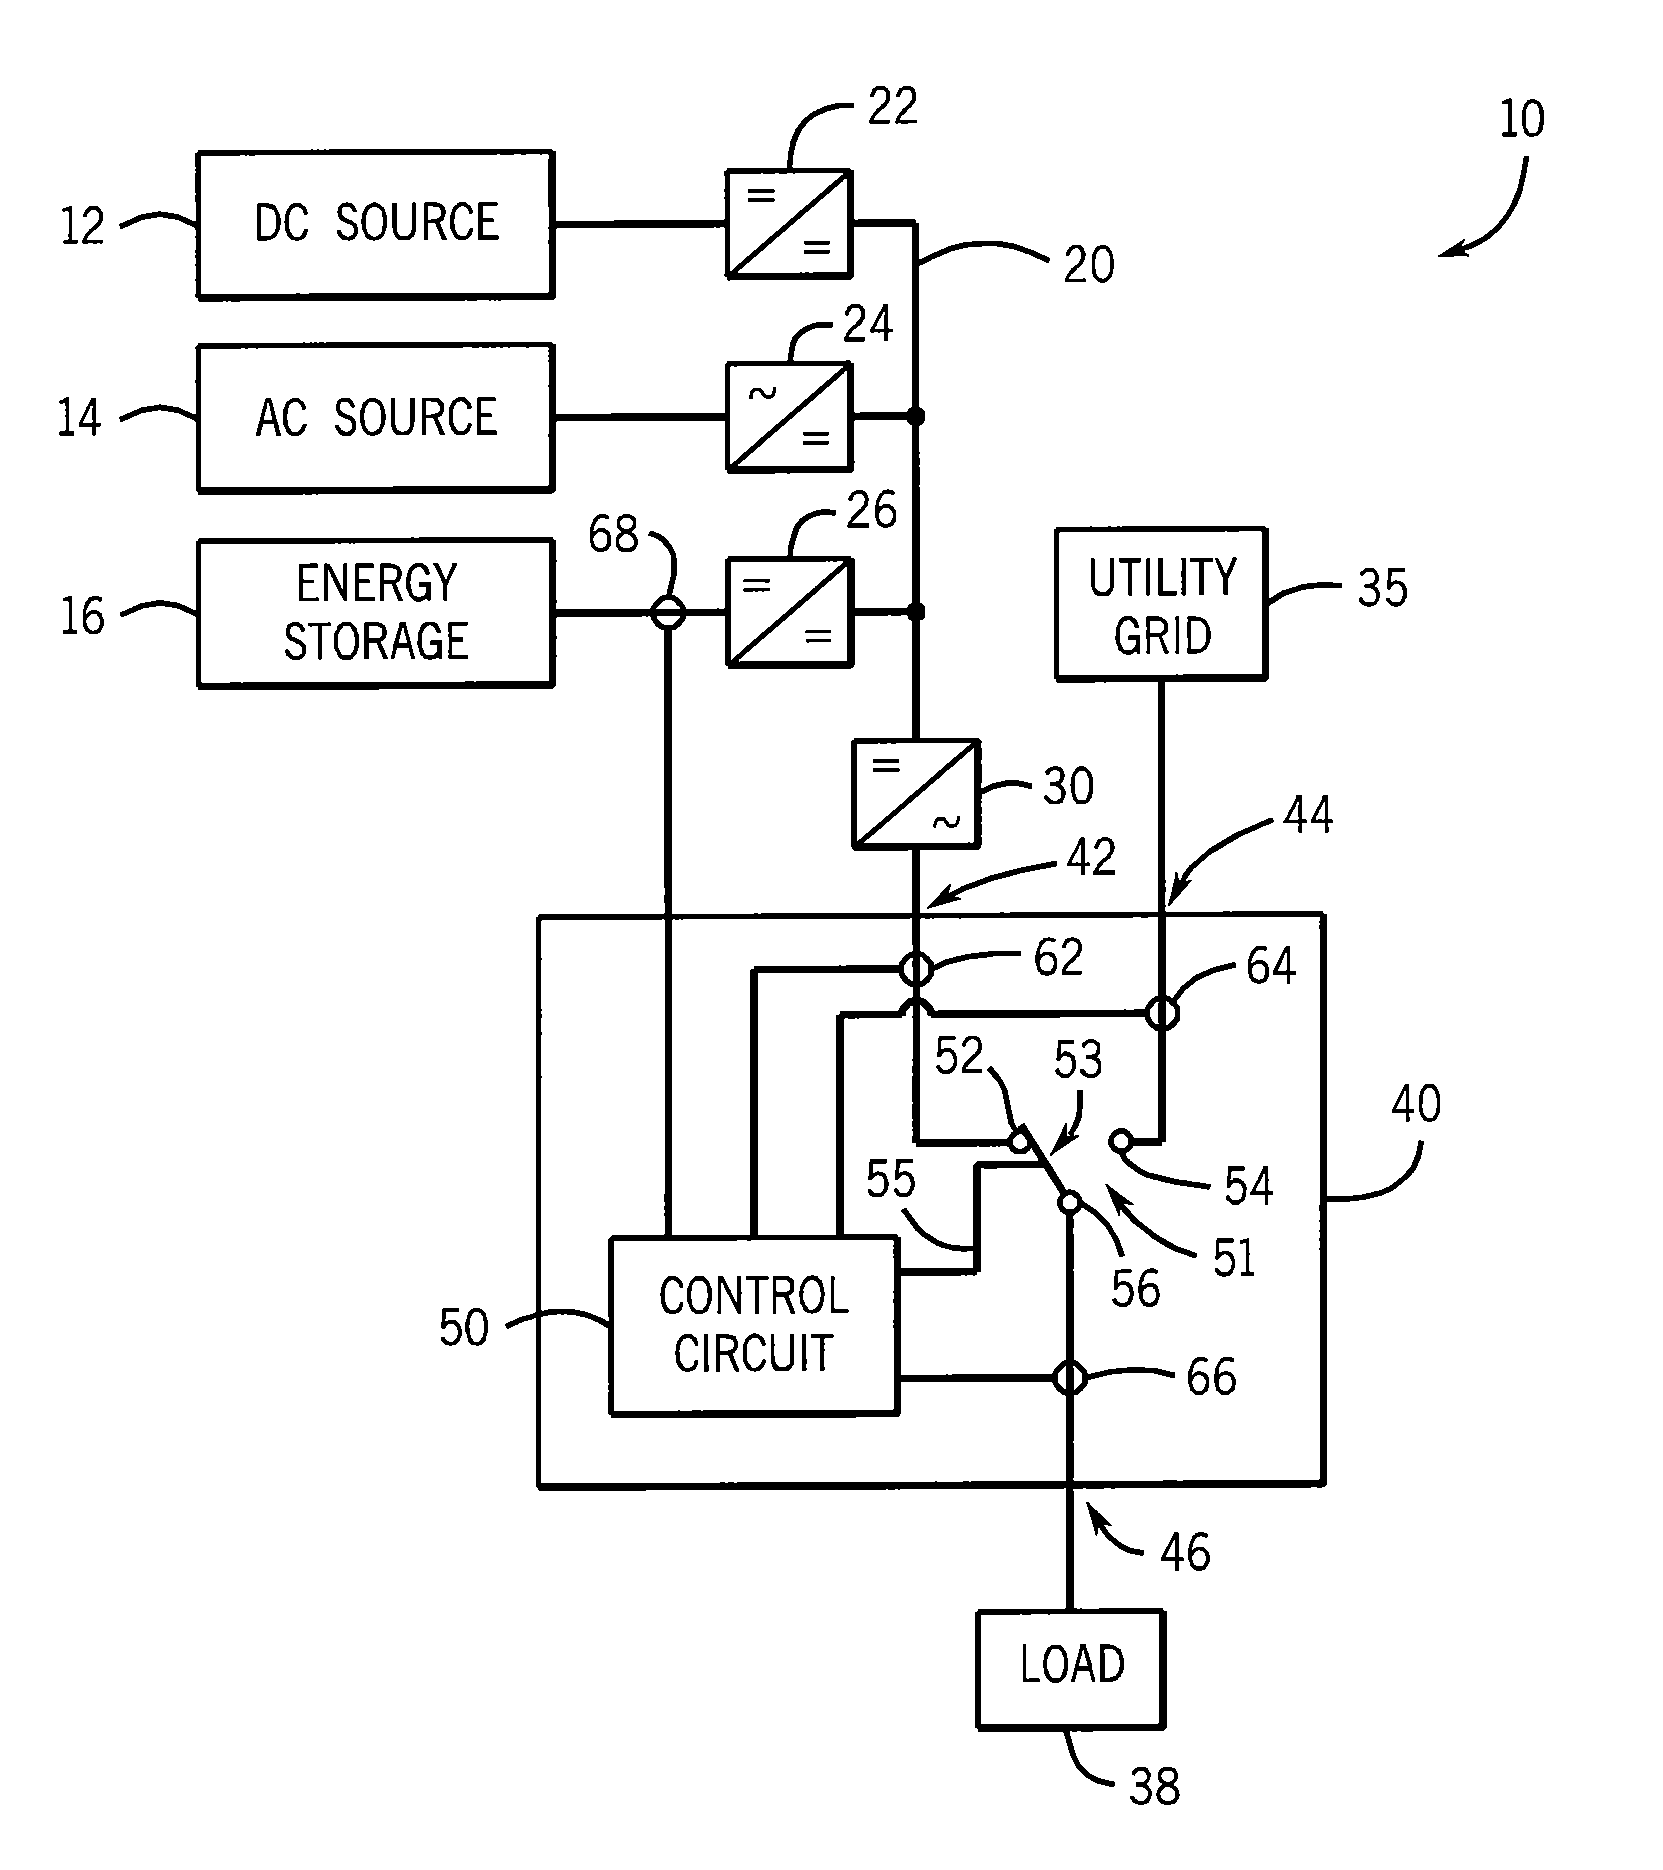 Transfer switch for automatically switching between alternative energy source and utility grid